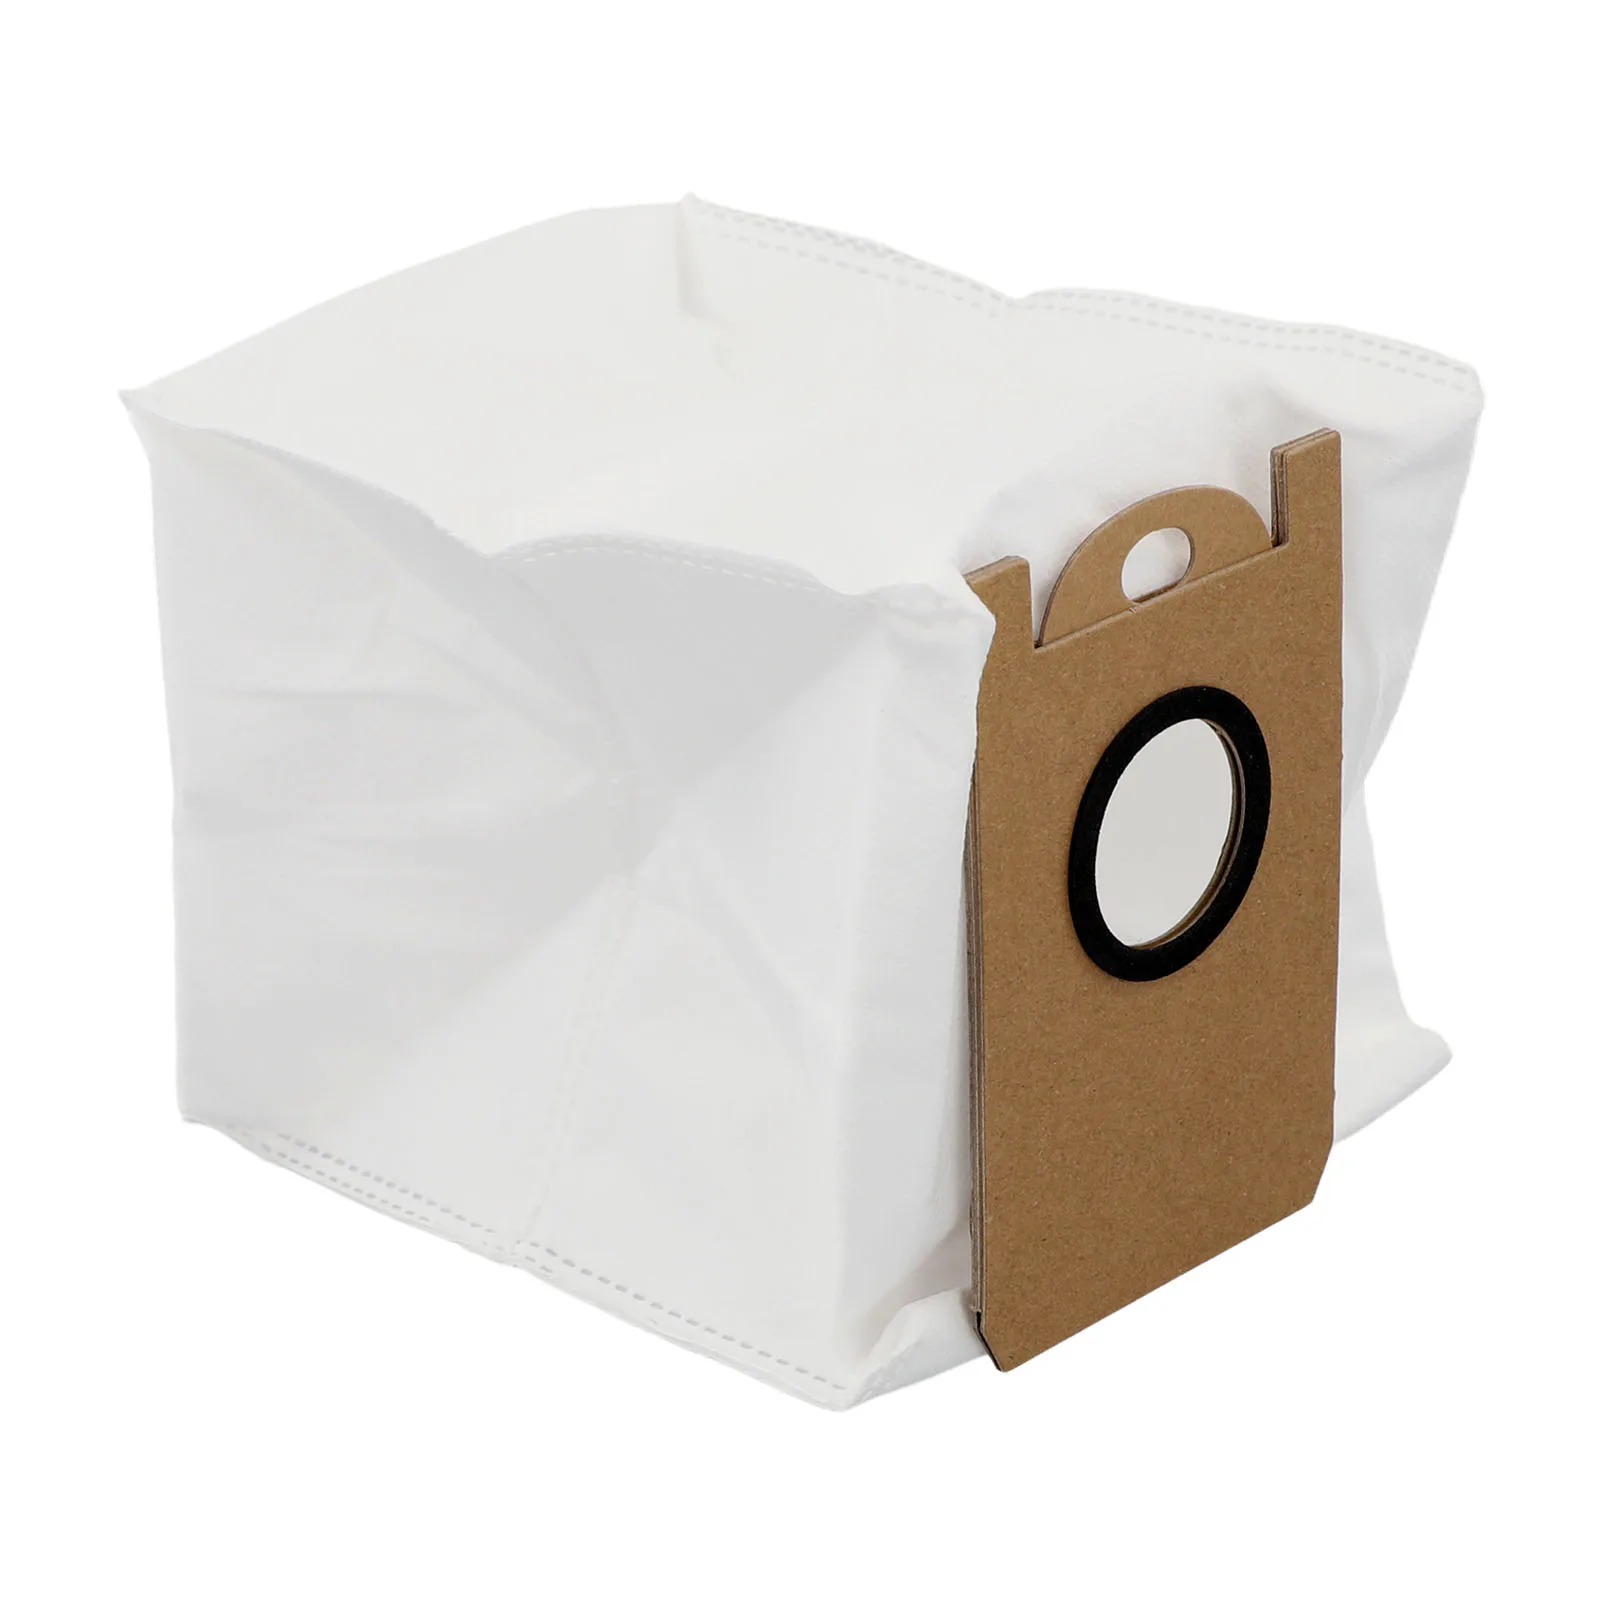 

4/10pcs Dust Bags For Cecotec For Conga 7490 For Eternal Genesis,For X-Treme,For Genesis Robot Vacuums Cleaner